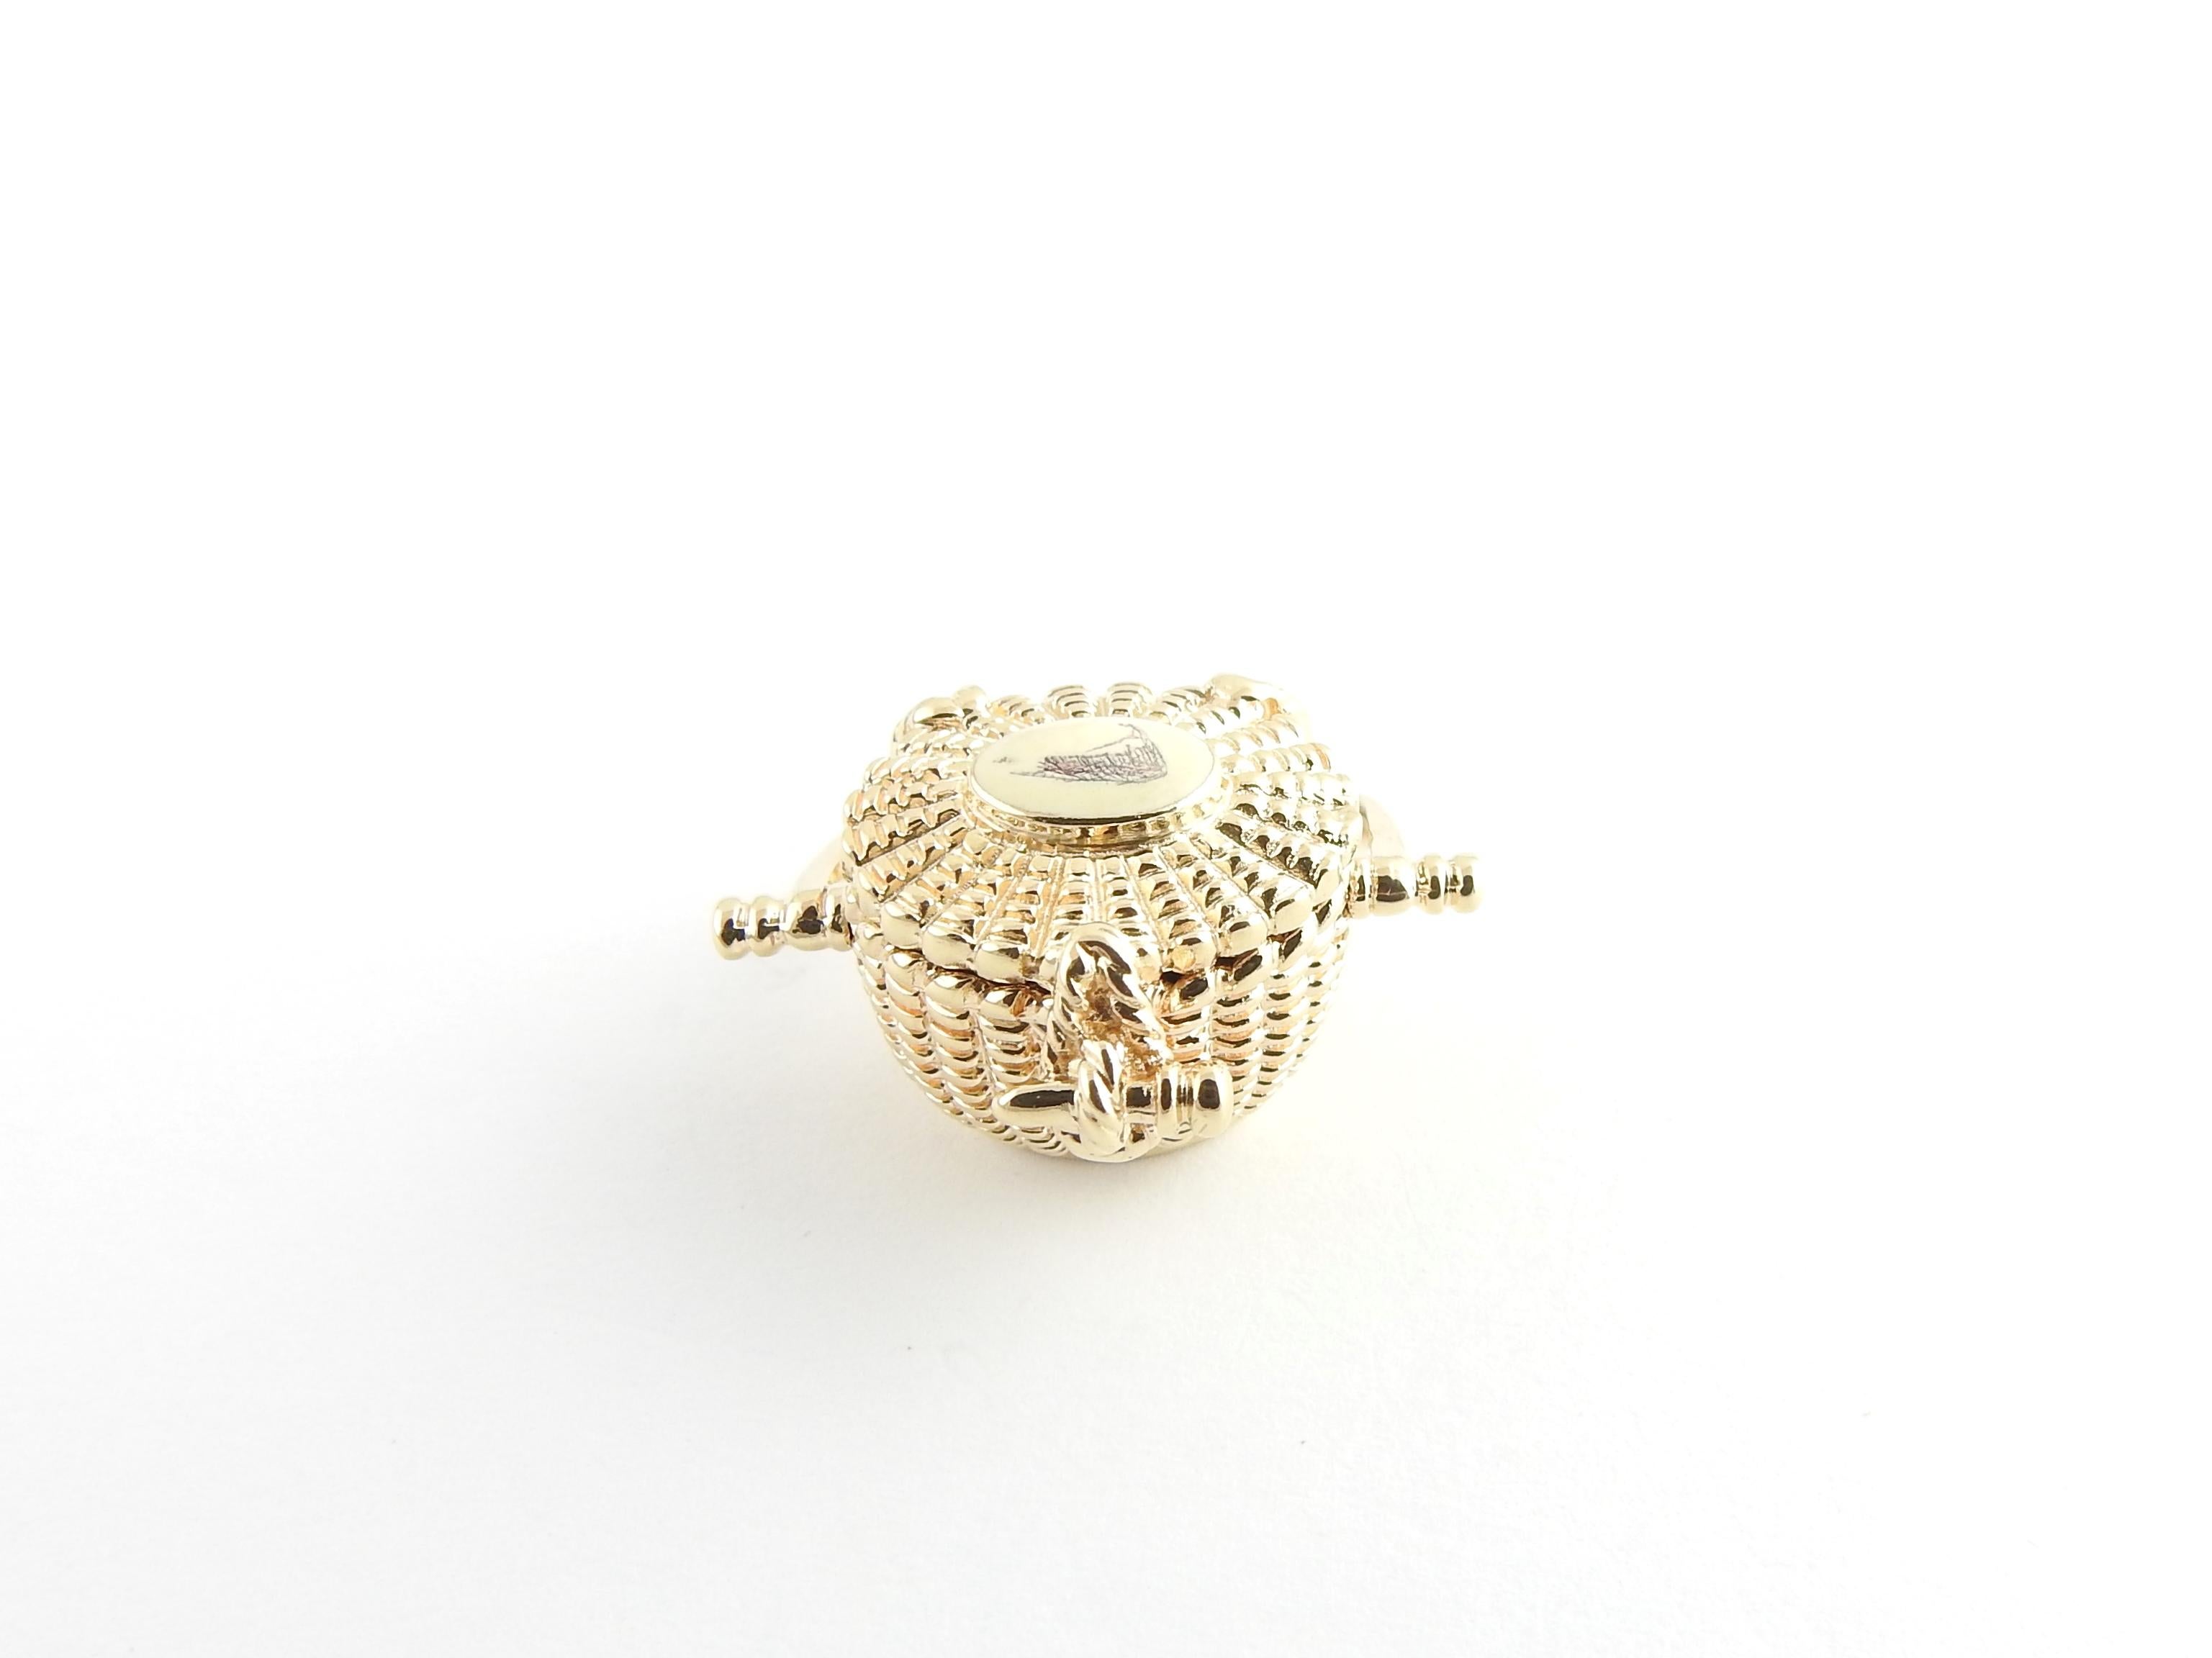 Vintage 14 Karat Yellow Gold Nantucket Basket Charm

This lovely 3D charm features a miniature Nantucket basket beautifully detailed in 14K yellow gold. Its hinged lid with scrimshaw fishing boat design opens to reveal a lucky penny!

Size: 23 mm x